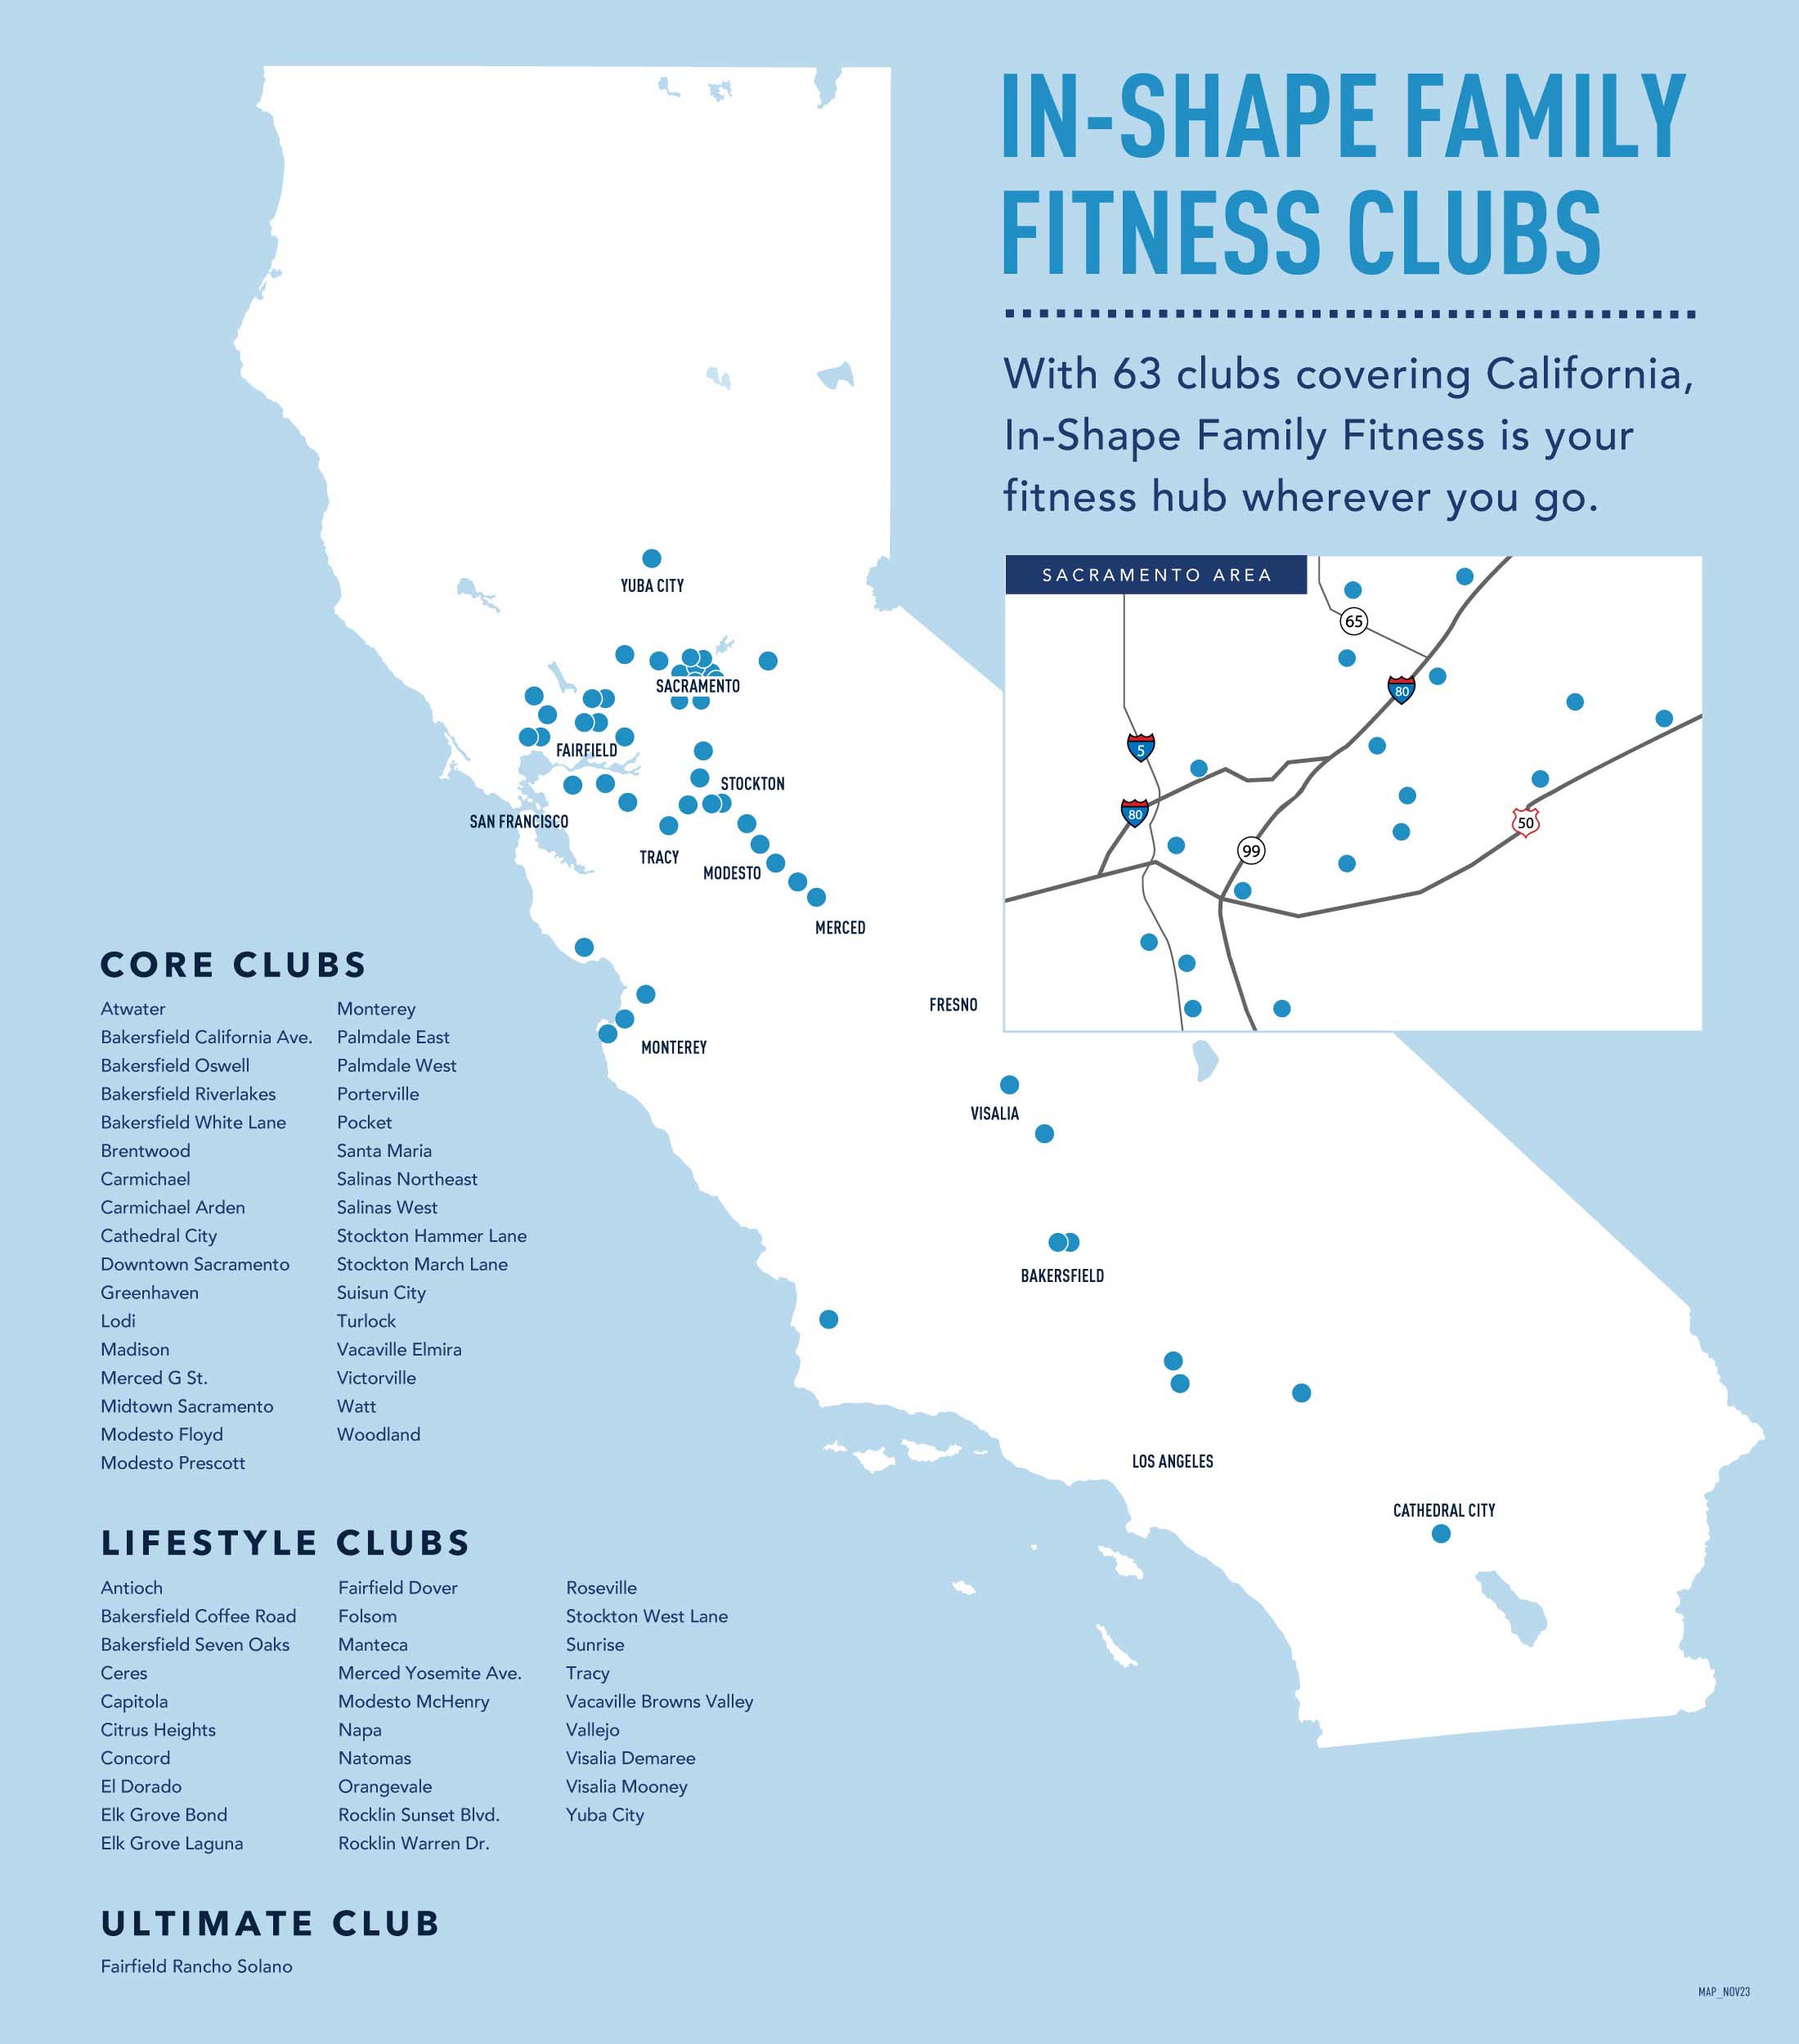 Map of 63 In-Shape Family Fitness clubs in California